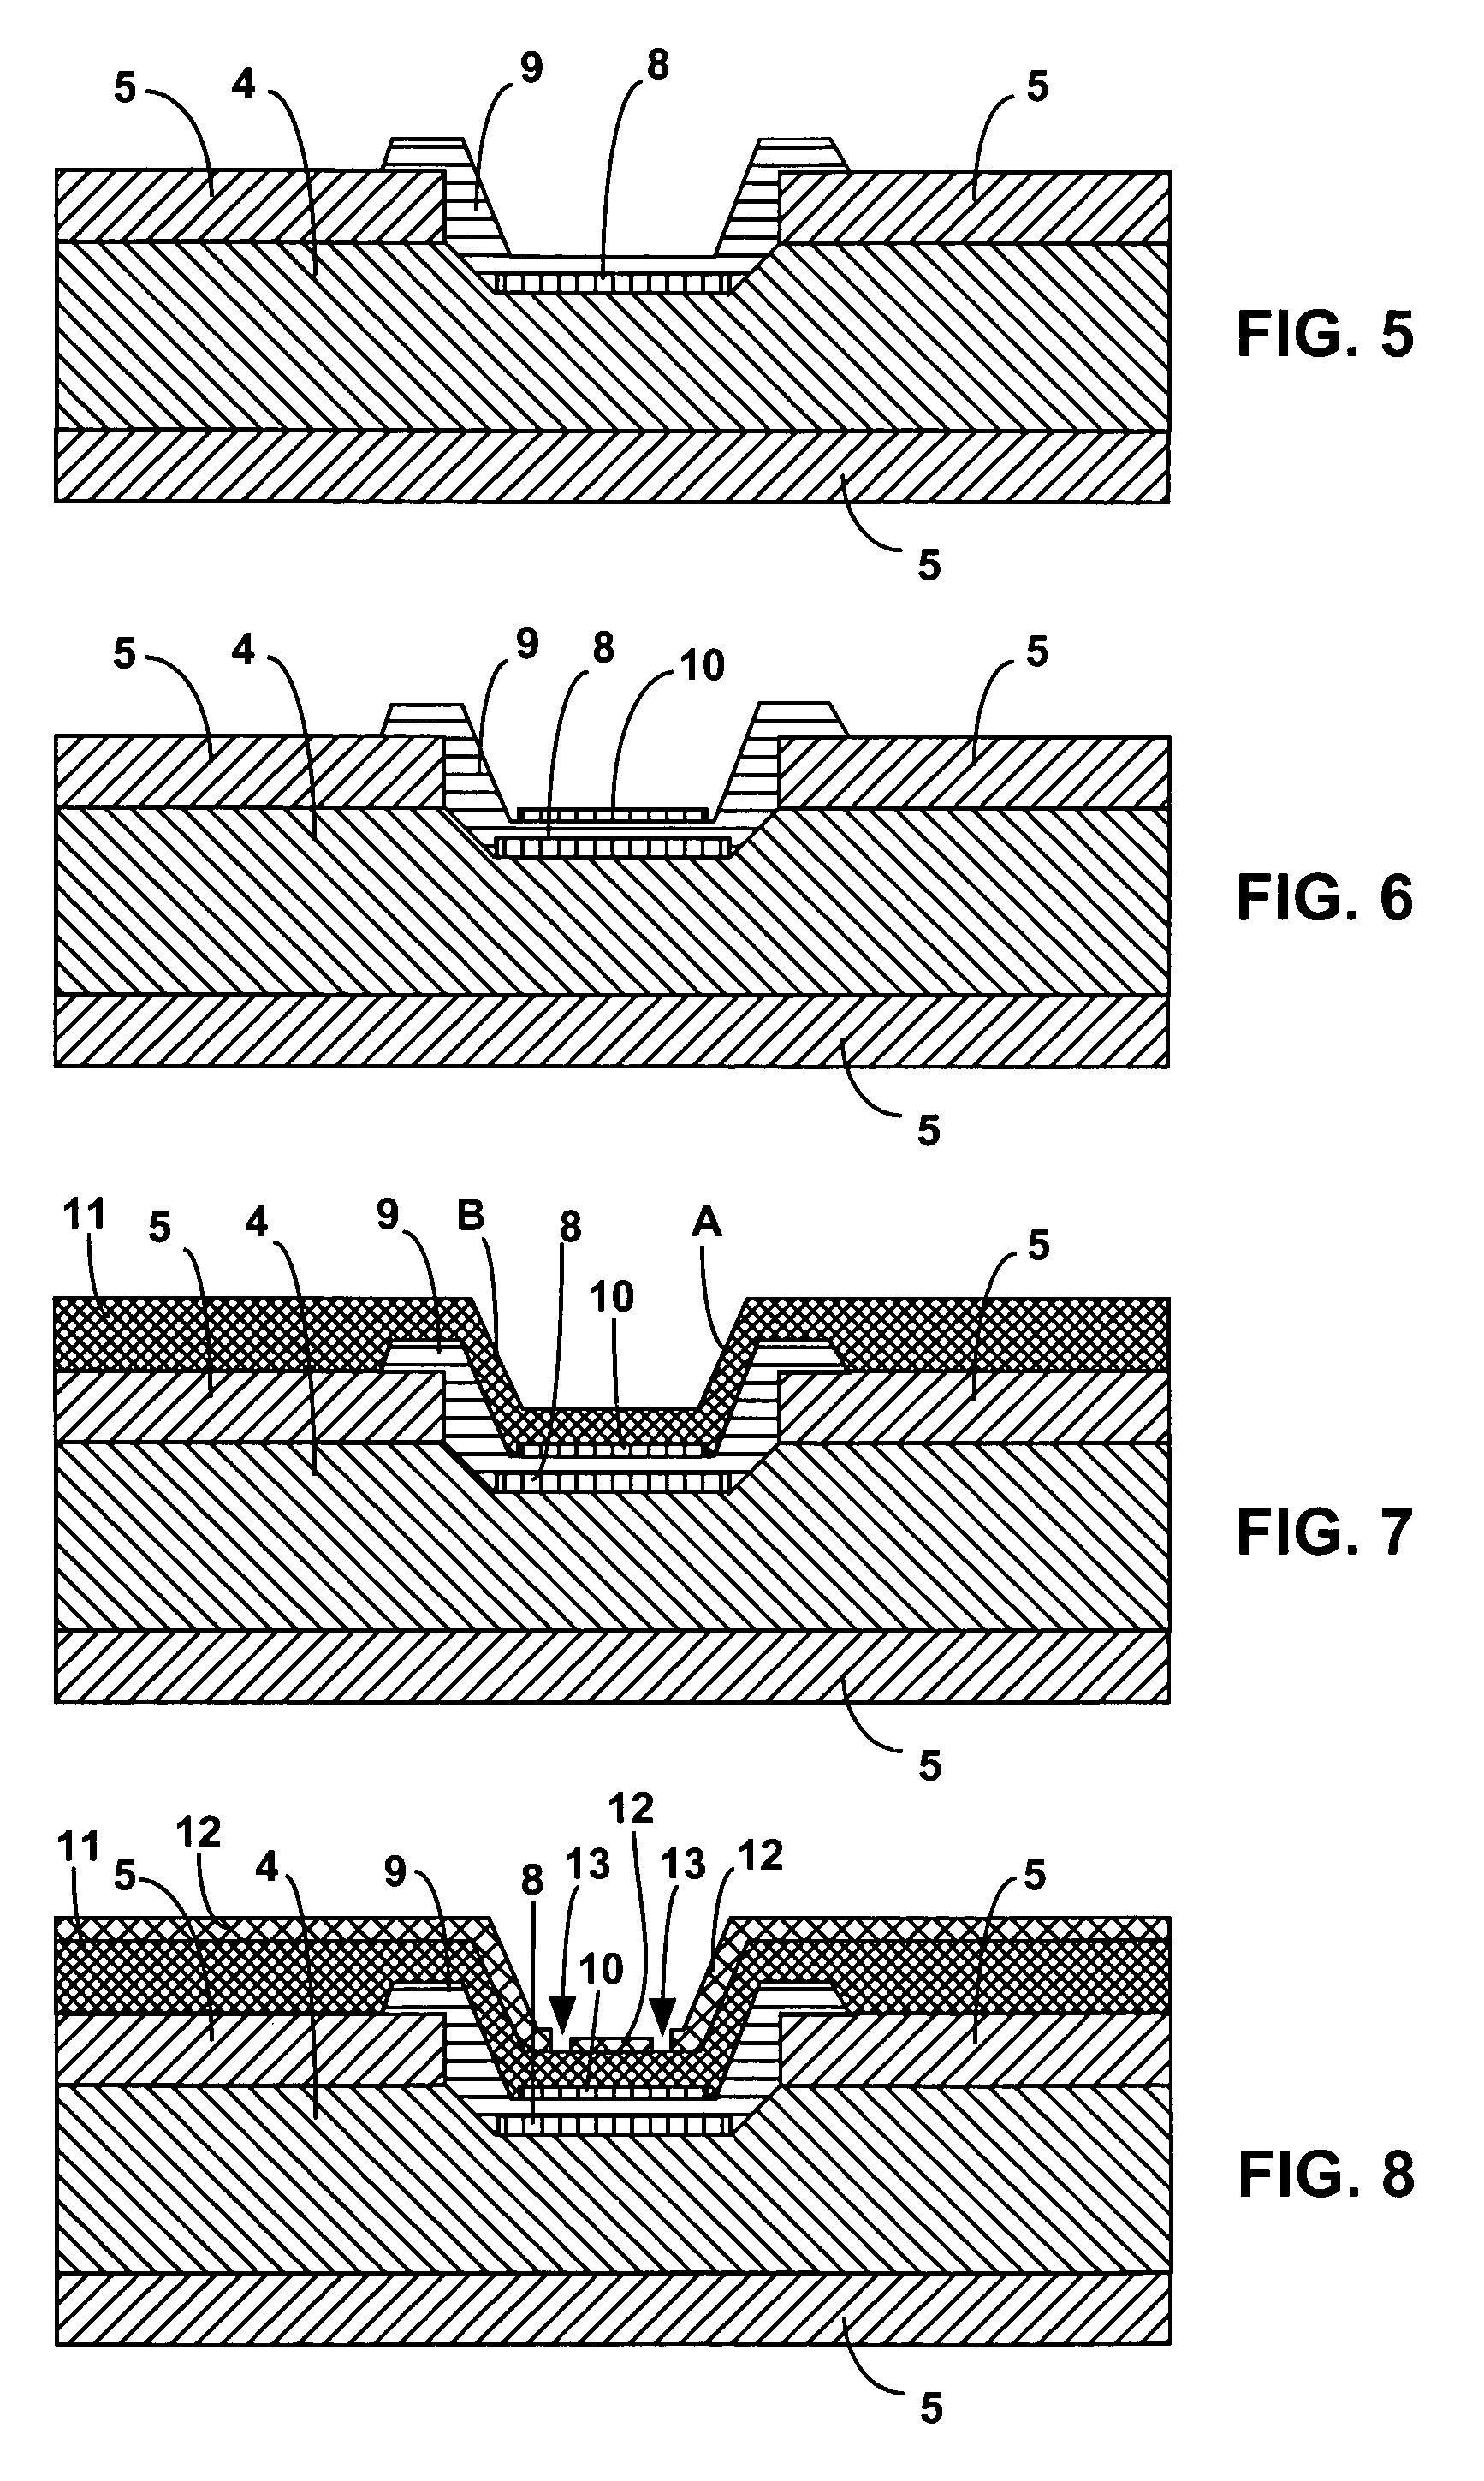 Process for fabricating monolithic membrane substrate structures with well-controlled air gaps